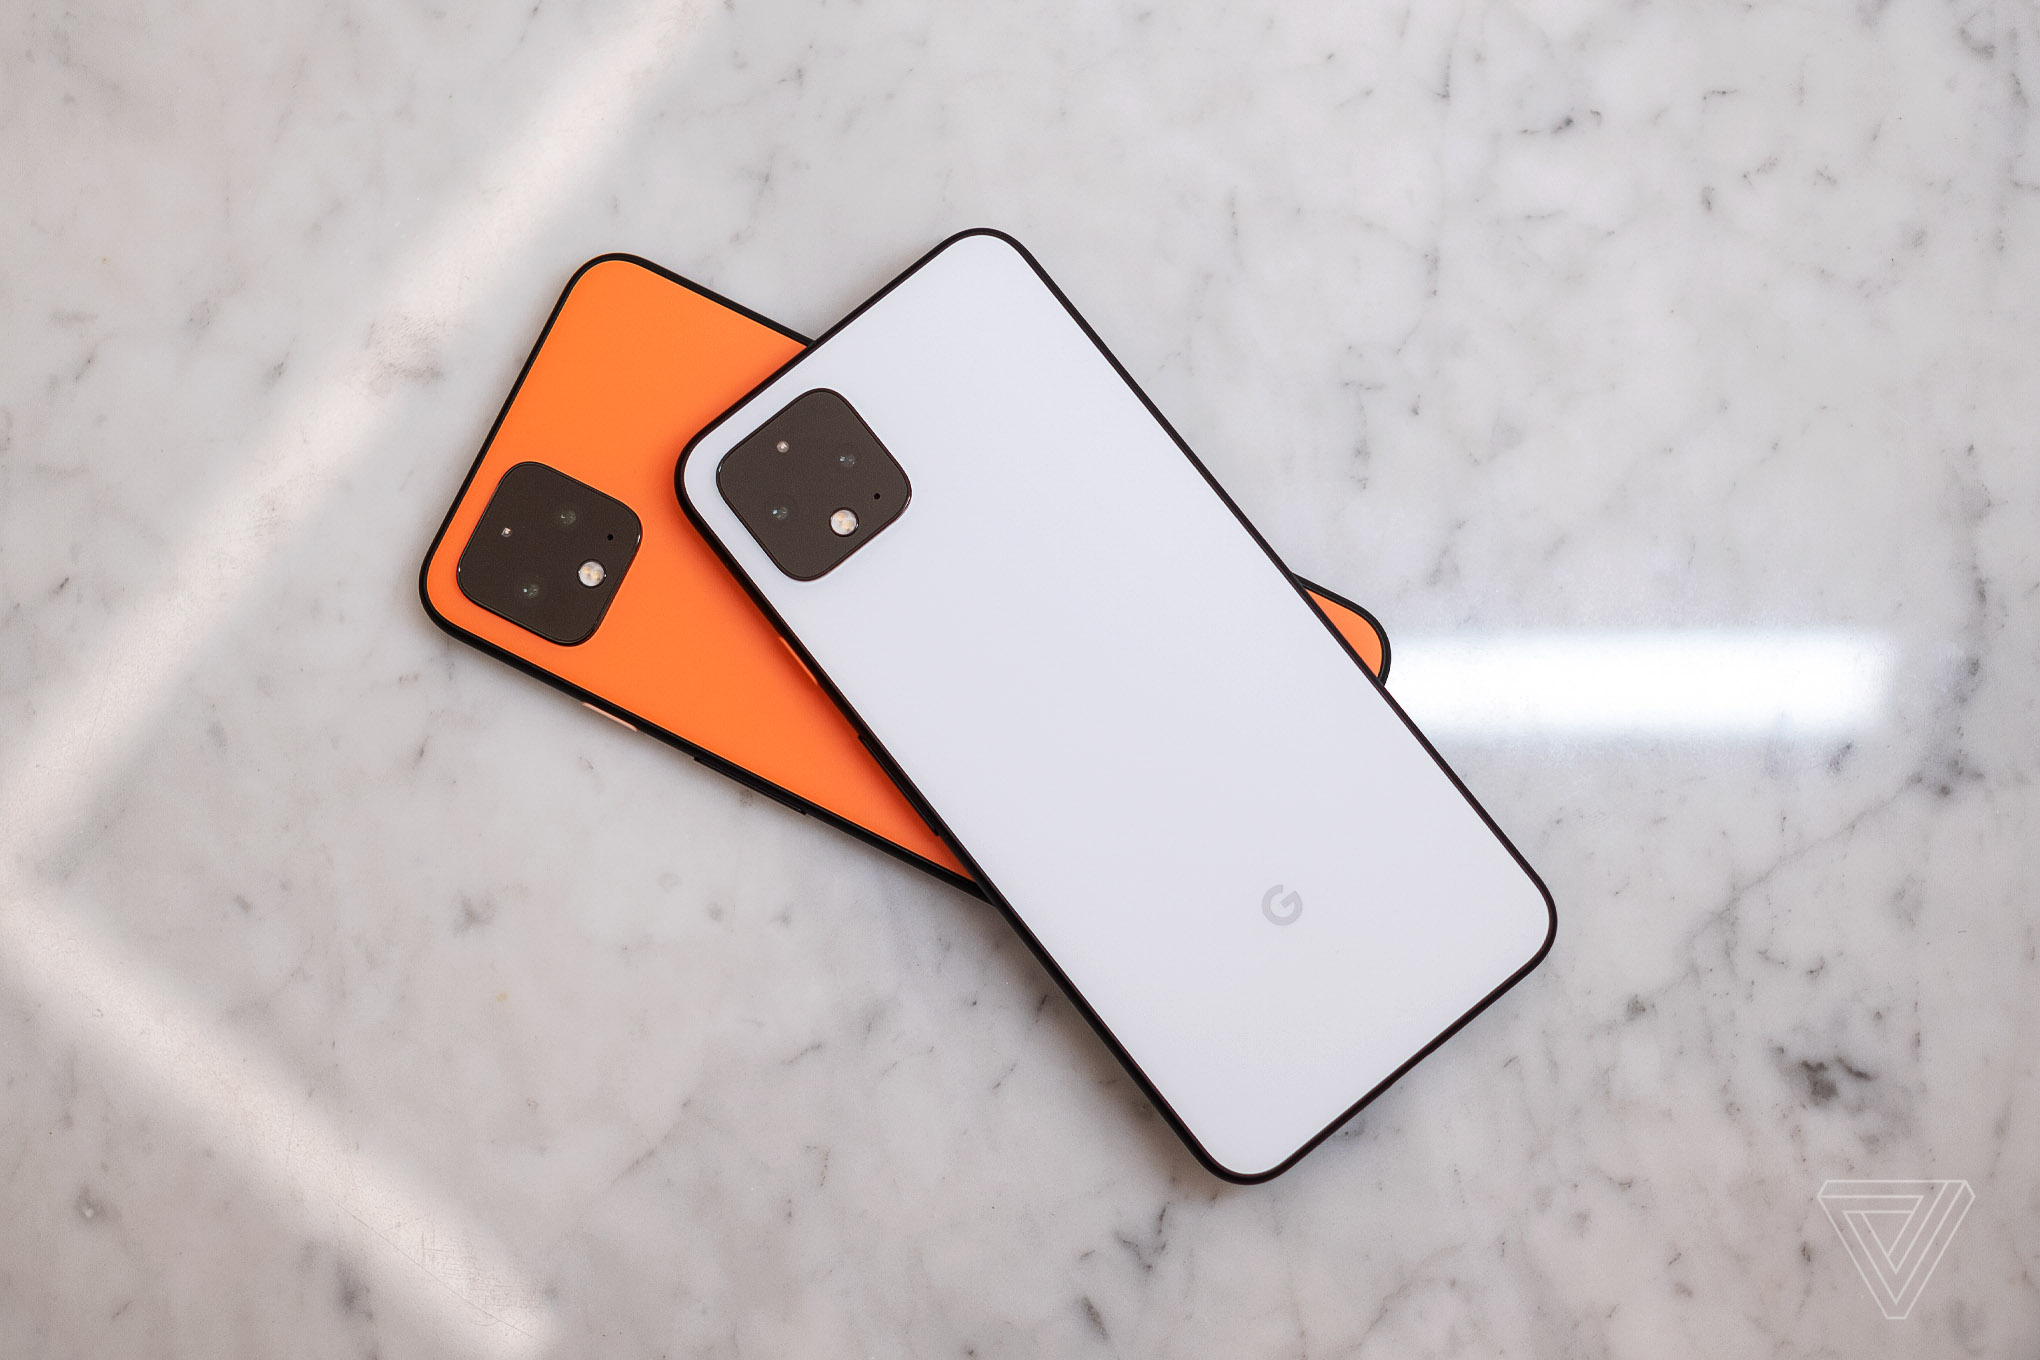 2 years late: Texas unexpectedly sues Google over misleading Pixel 4 ads